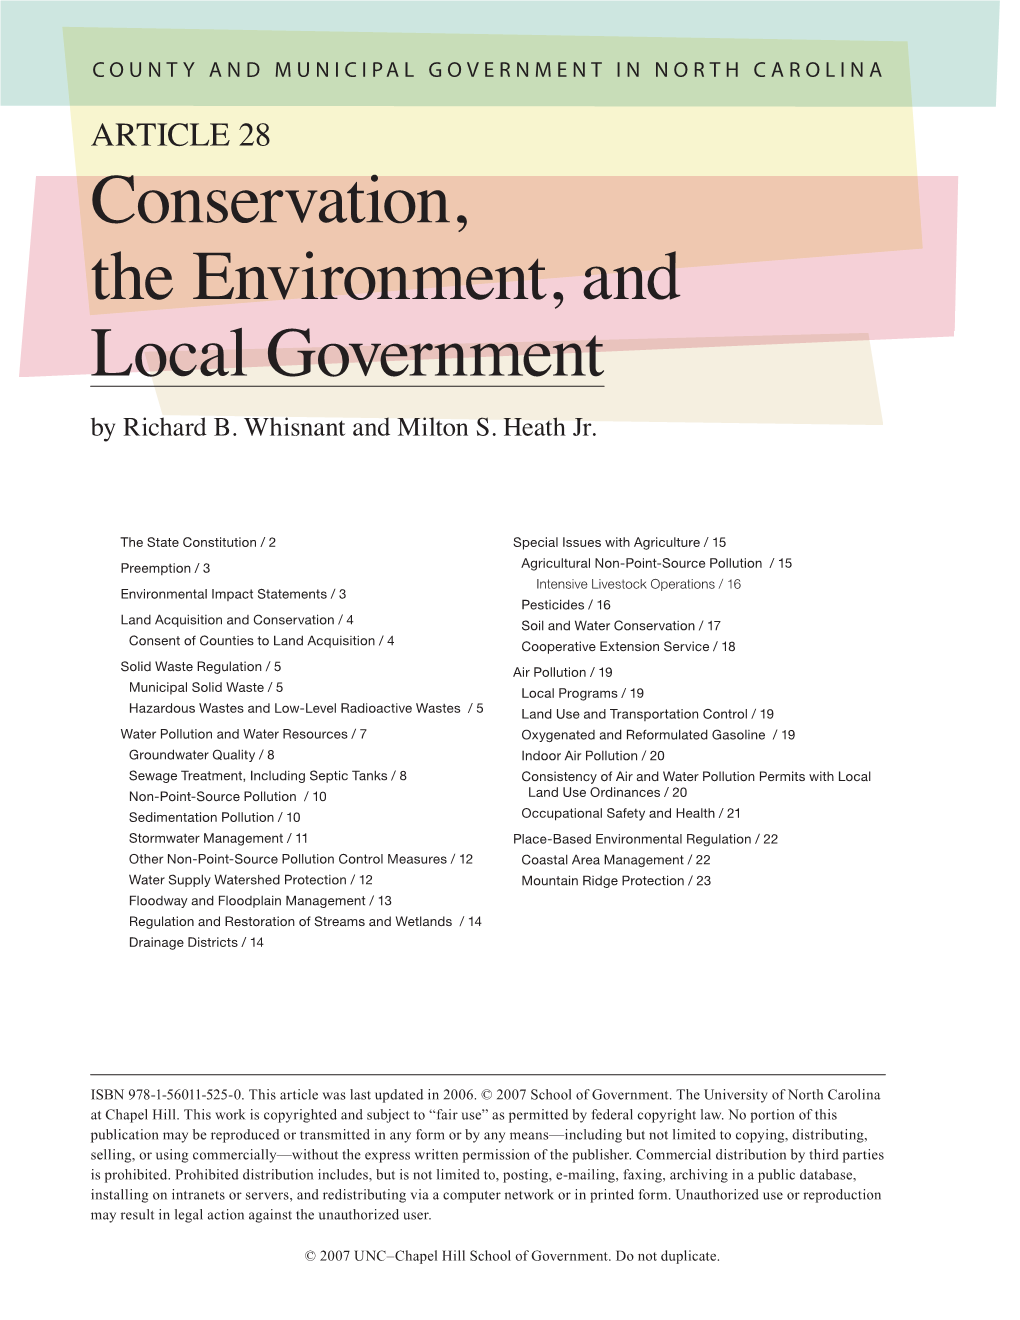 Conservation, the Environment, and Local Government by Richard B